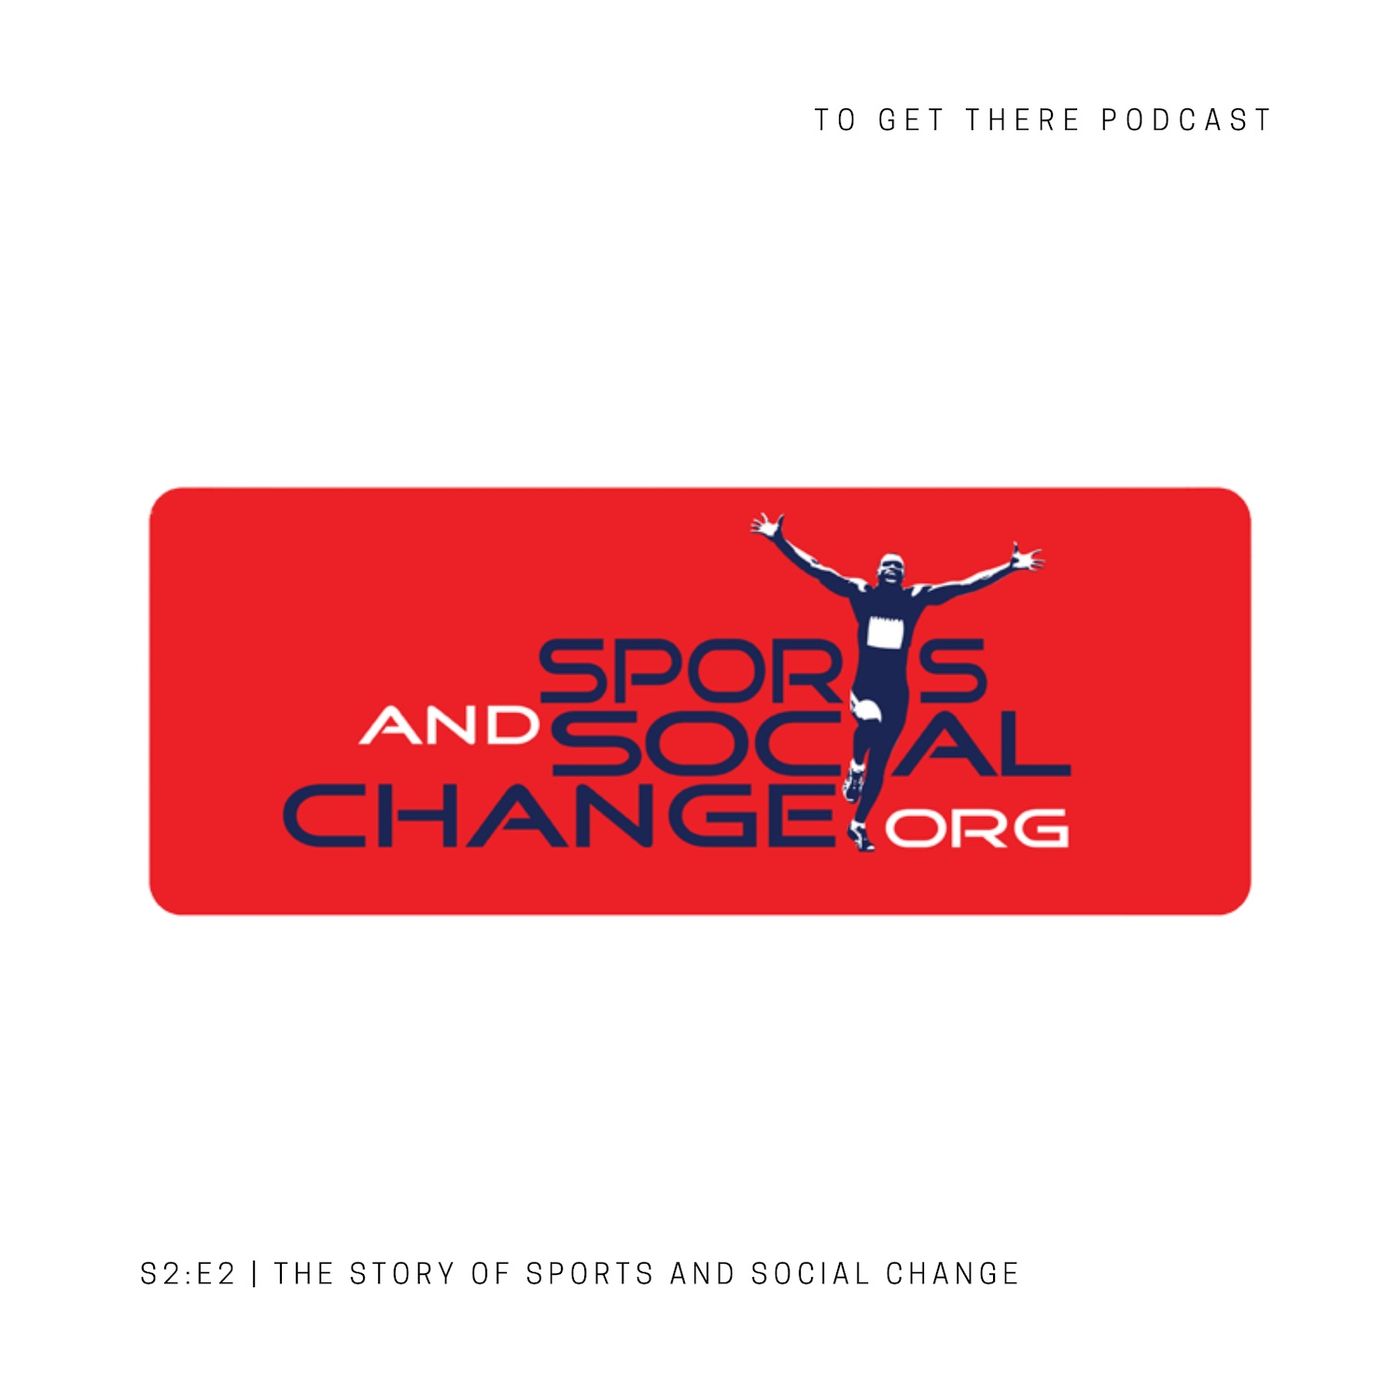 Howard Brodwin - The Story of Sports and Social Change